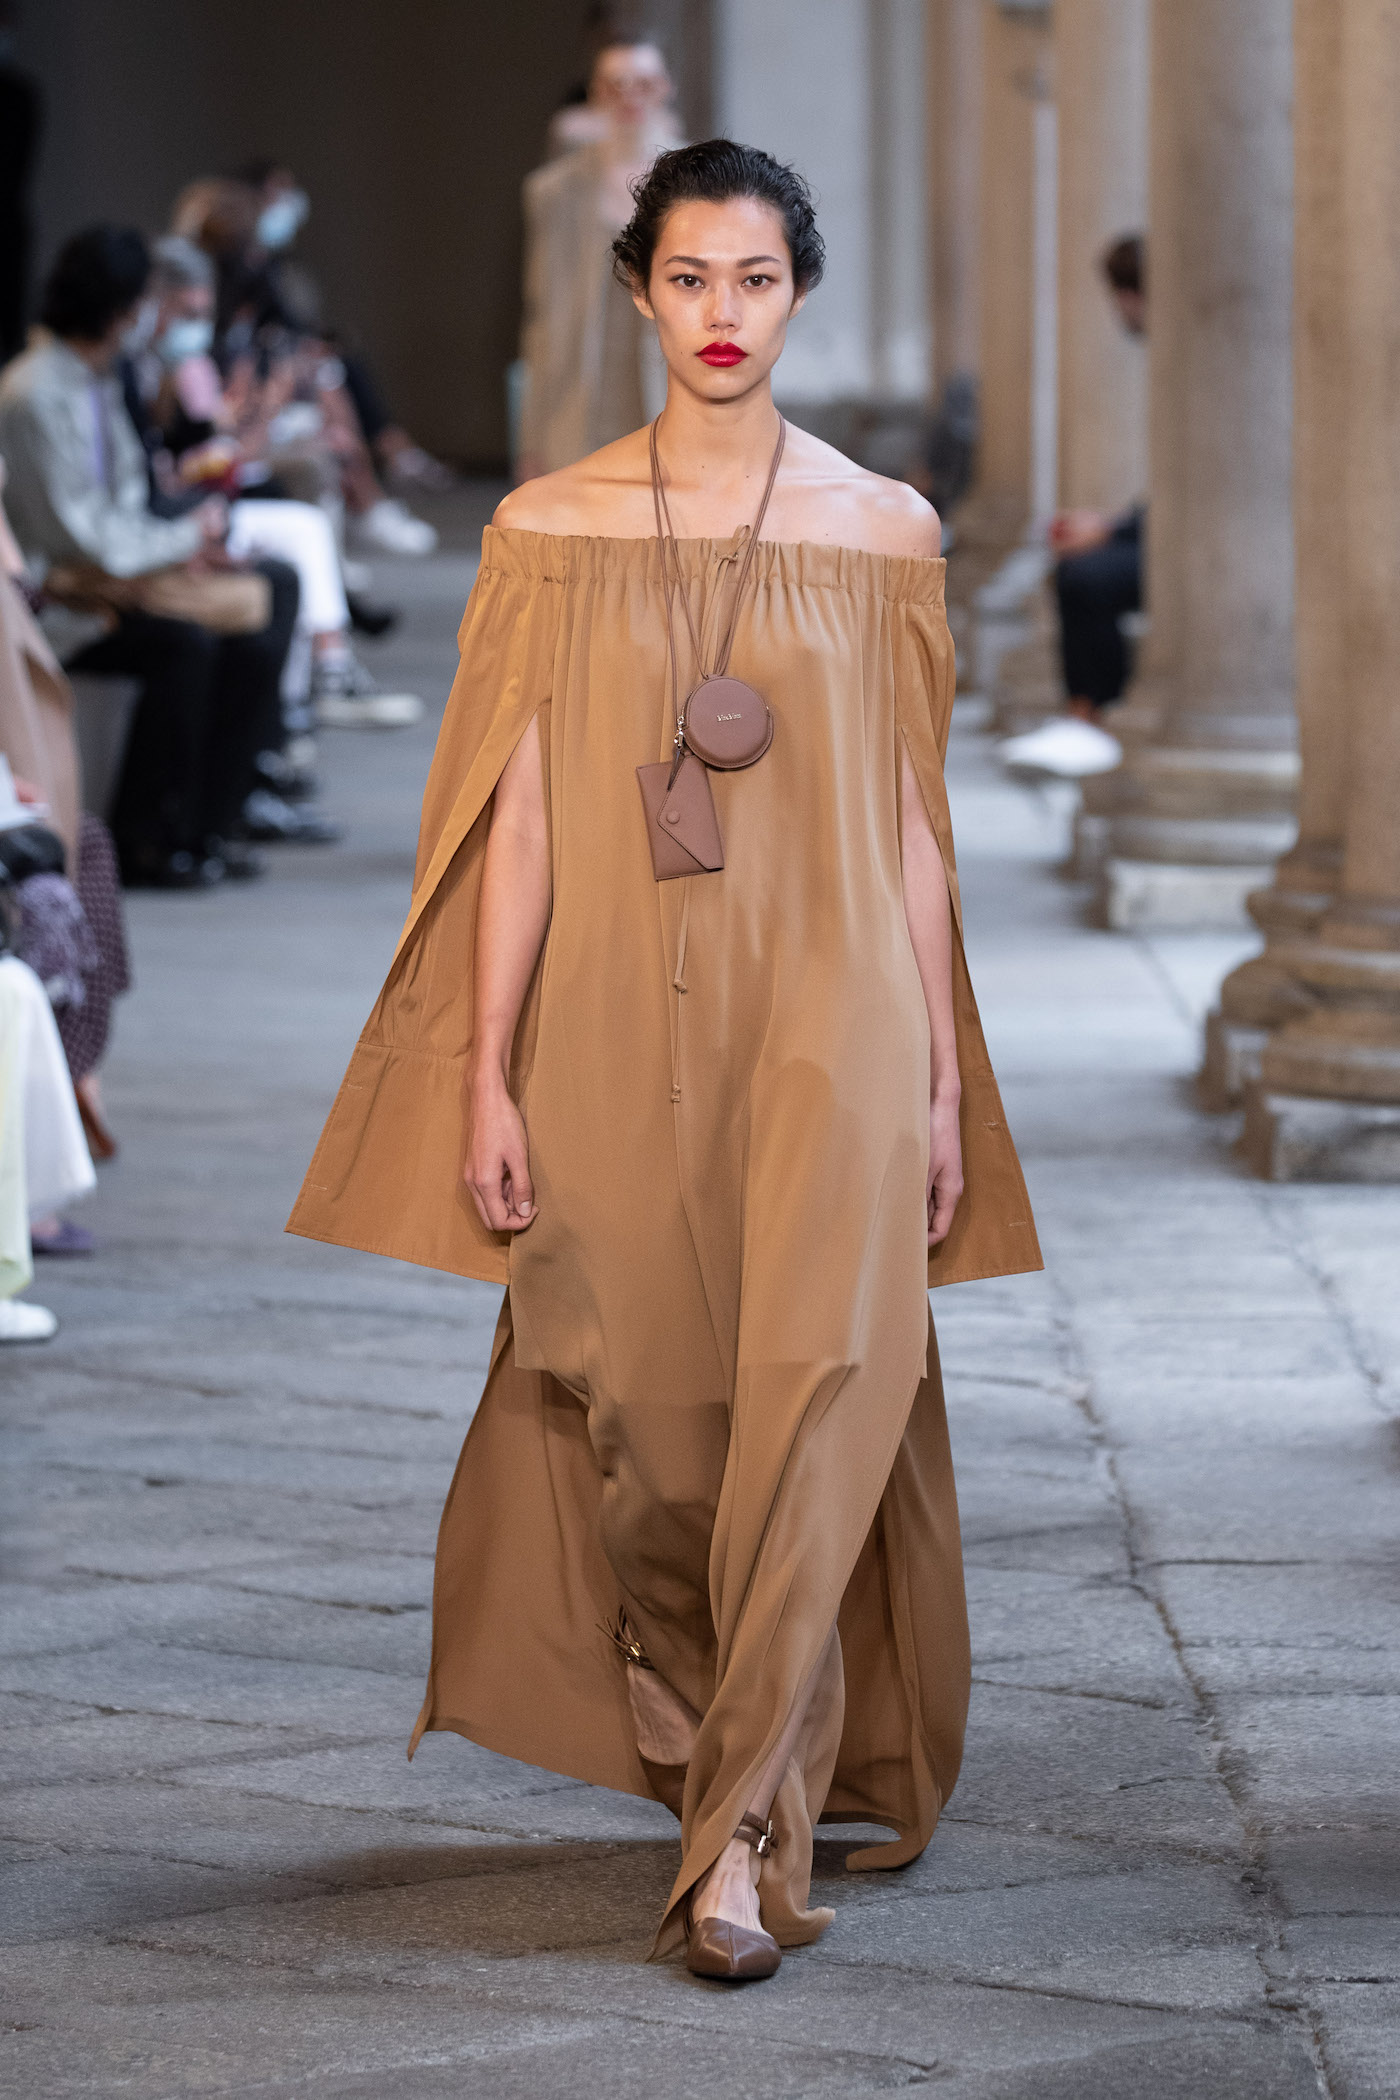 Max Maras Springsummer 2021 Collection Is For Women Who Rebuild The